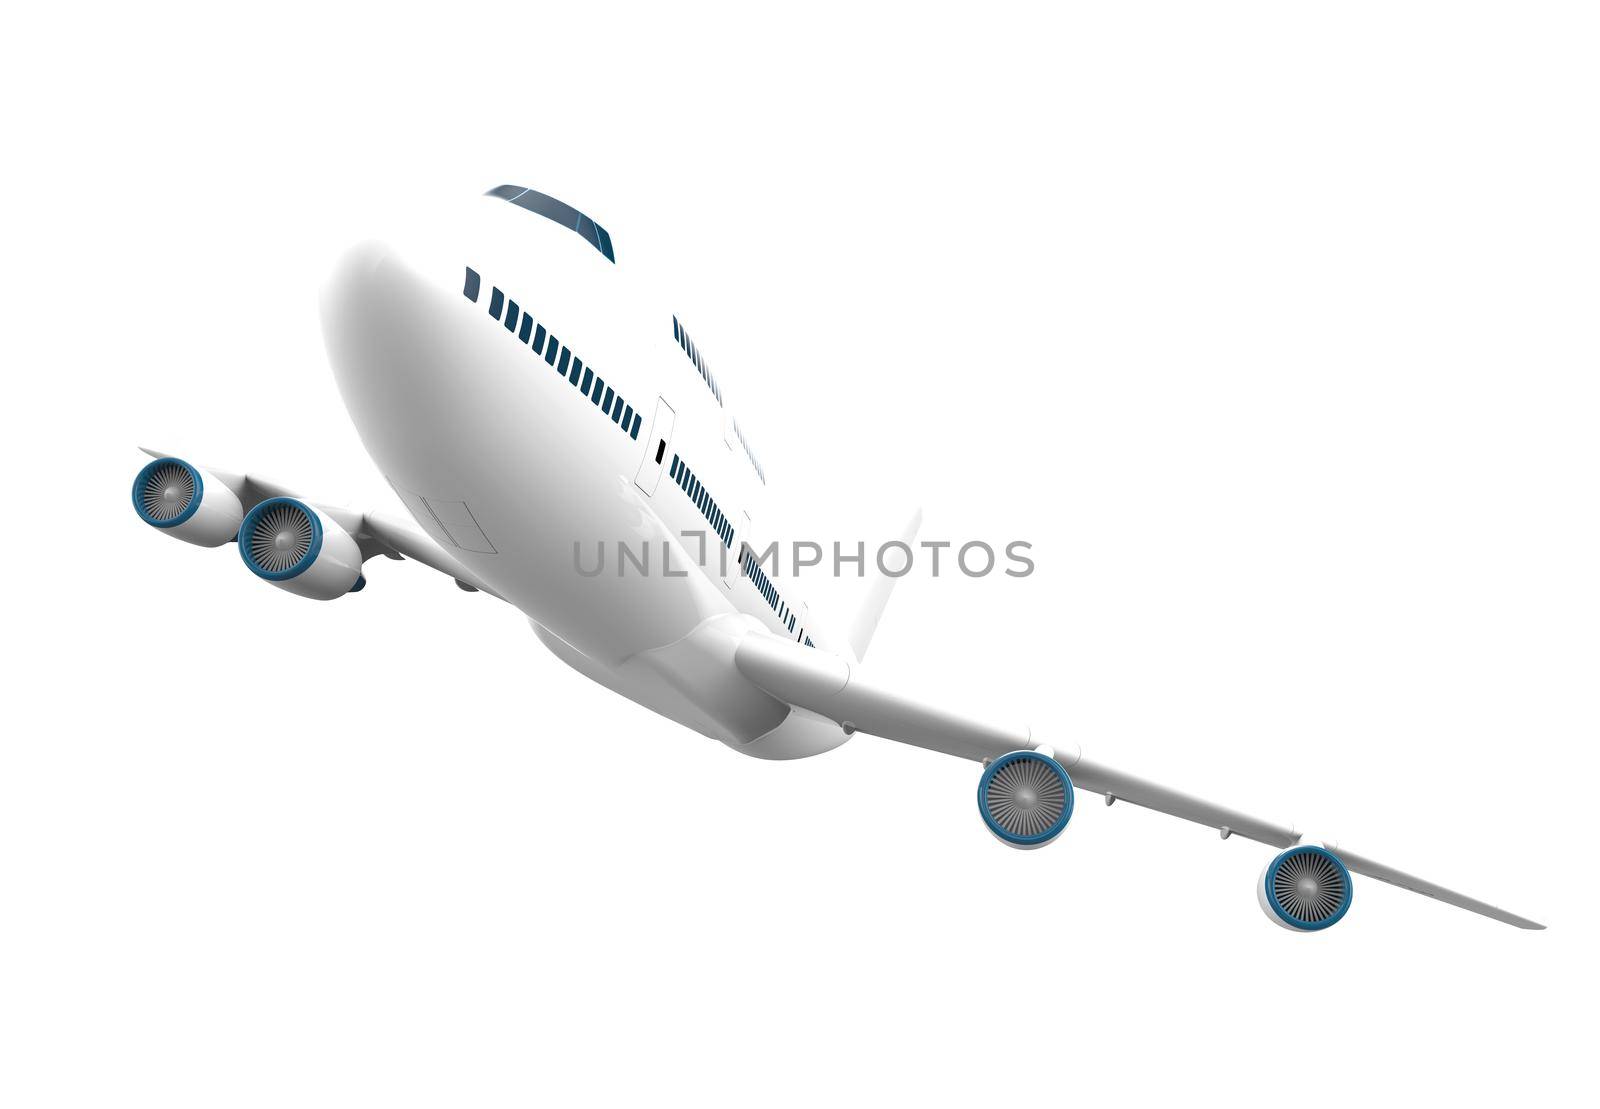 Big airplane isolated on a white background: 3D illustration